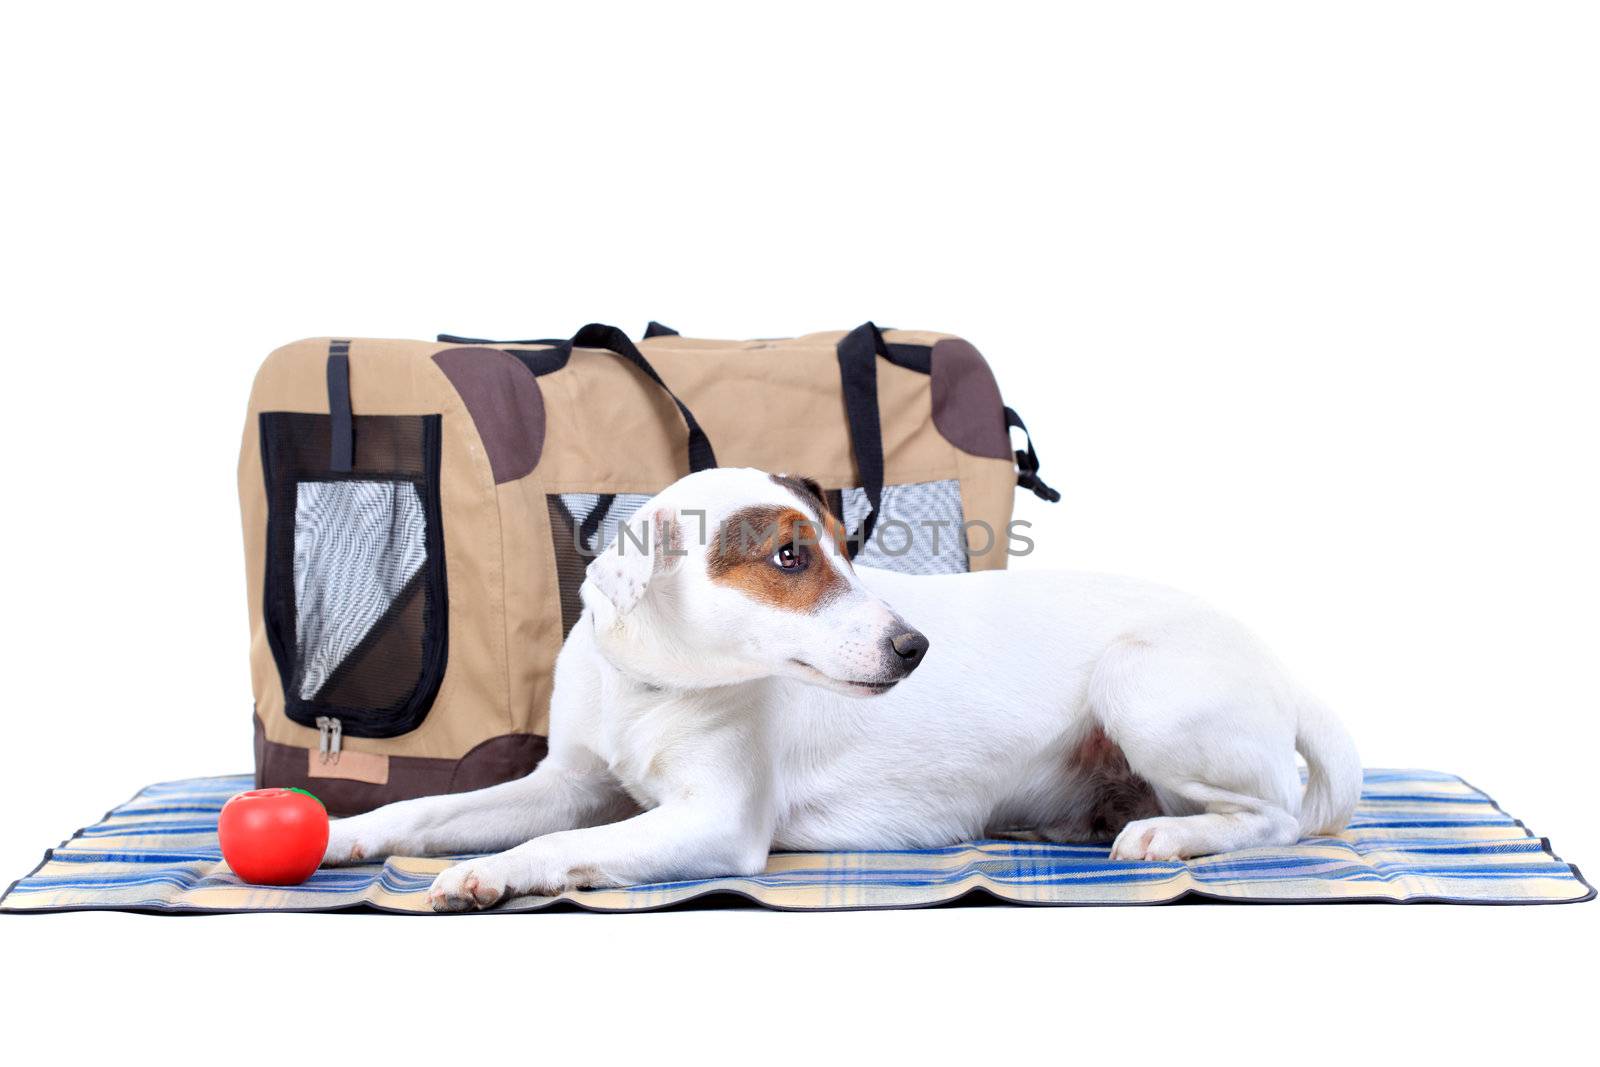 Jack Russel Terrier with a carrying bag by kokimk